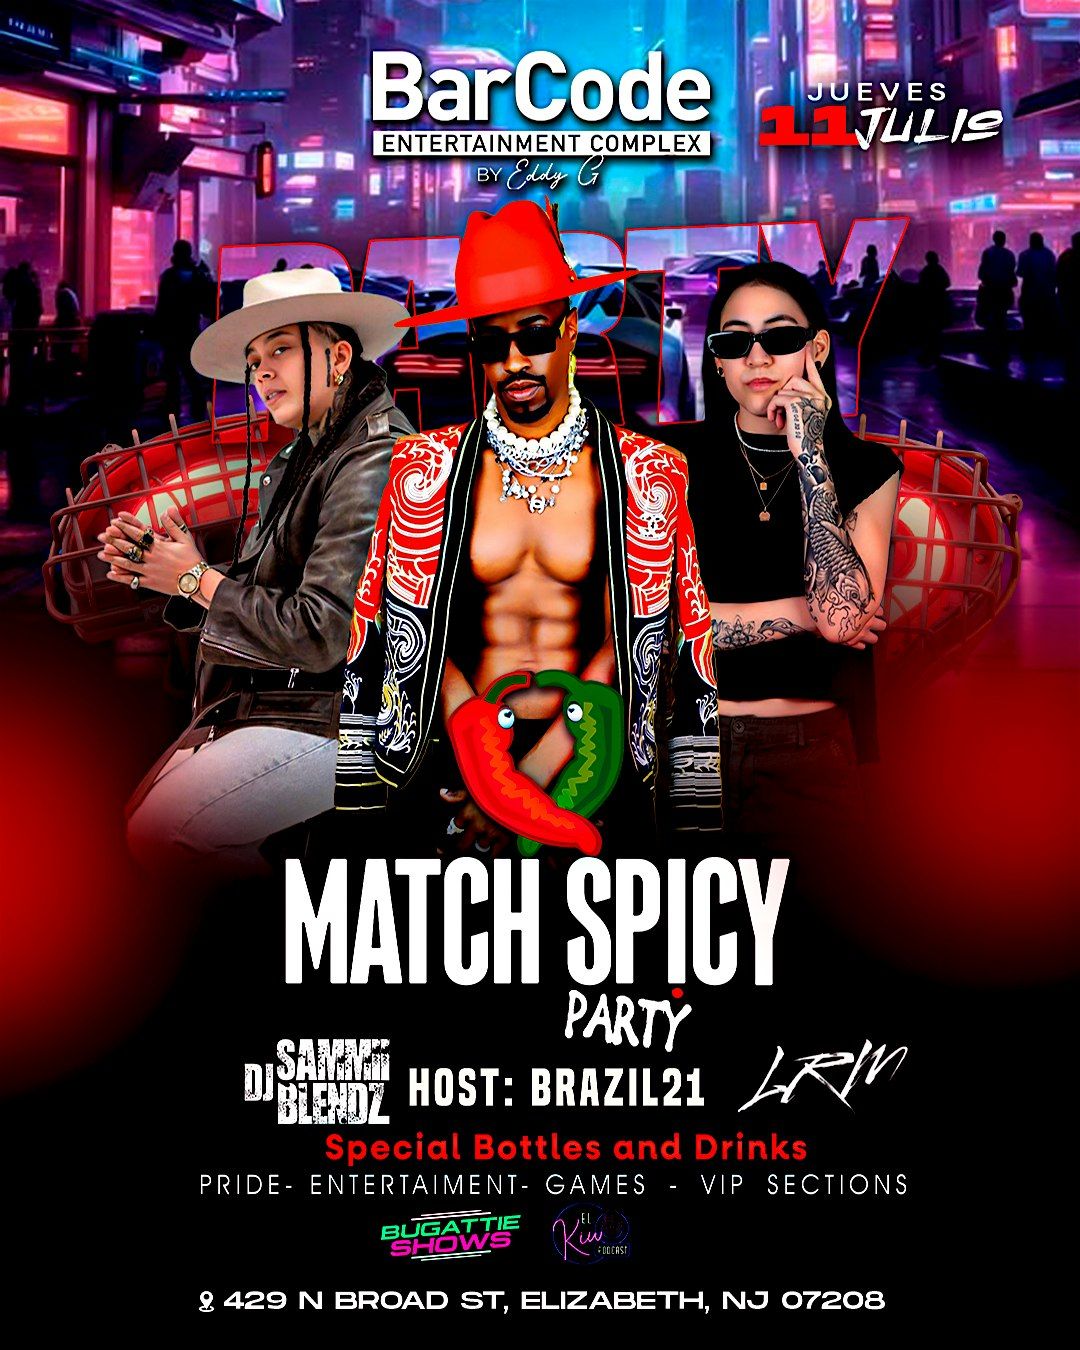 MATCH SPICY PARTY